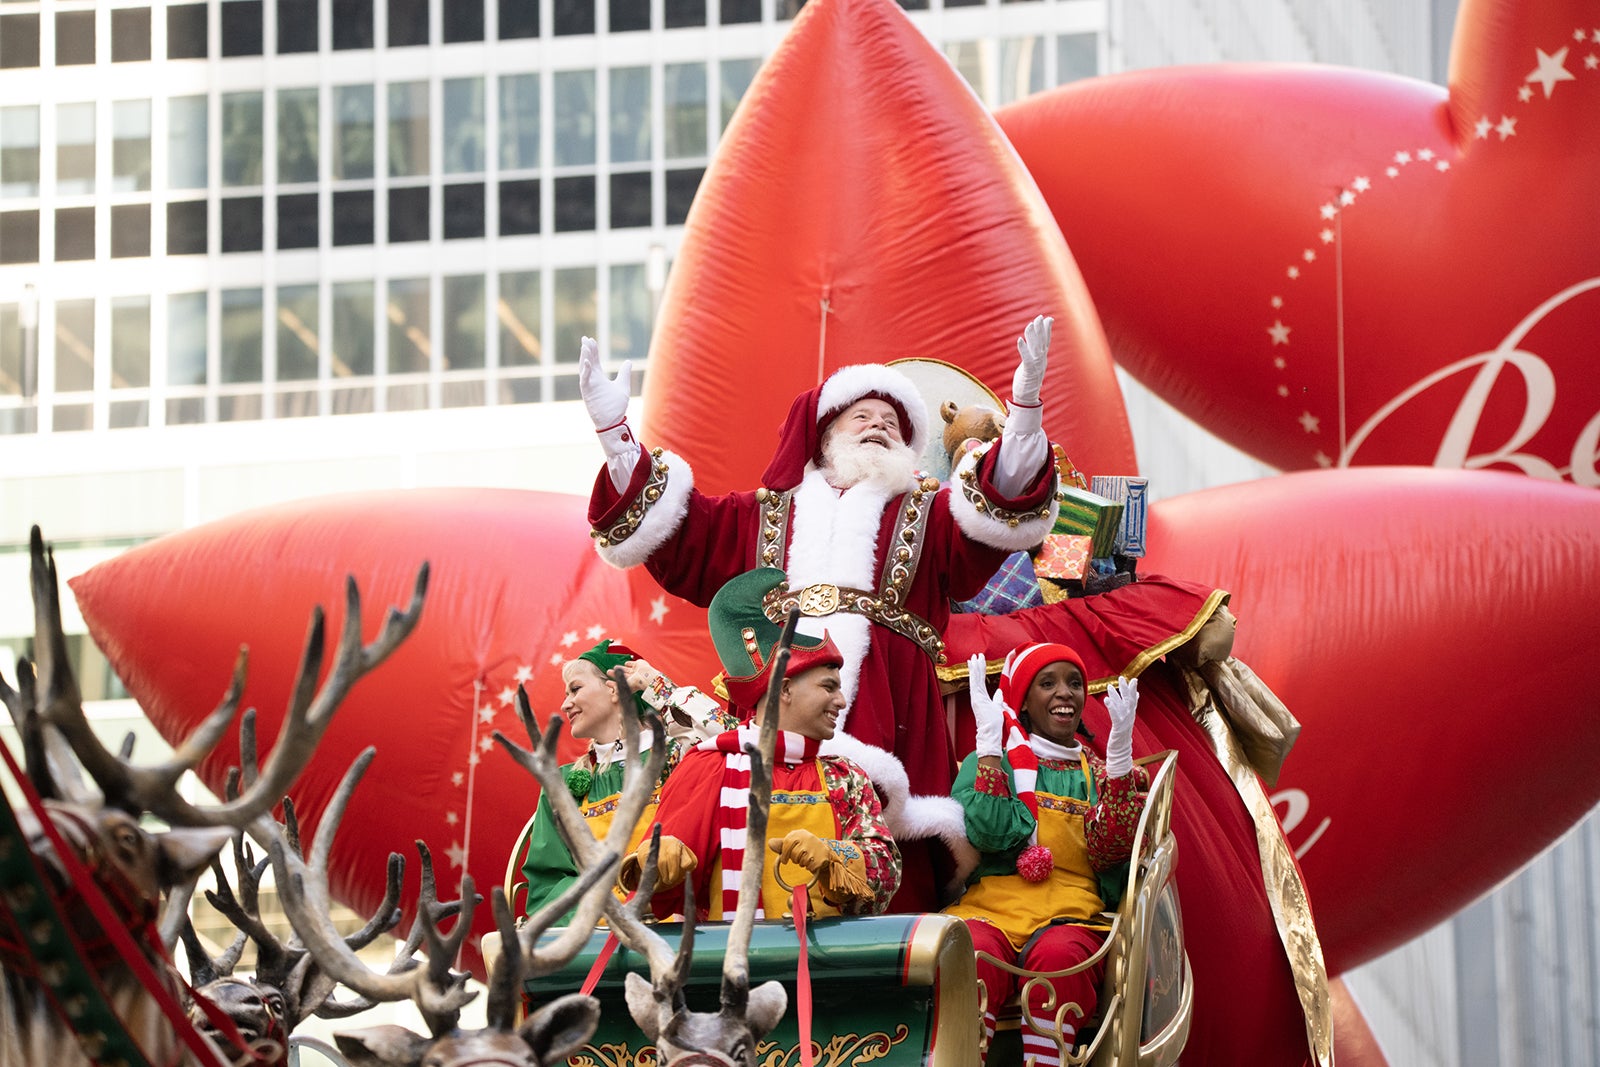 Santa Claus attends the 2022 Macy's Thanksgiving Day Parade on Nov. 24, 2022, in New York City